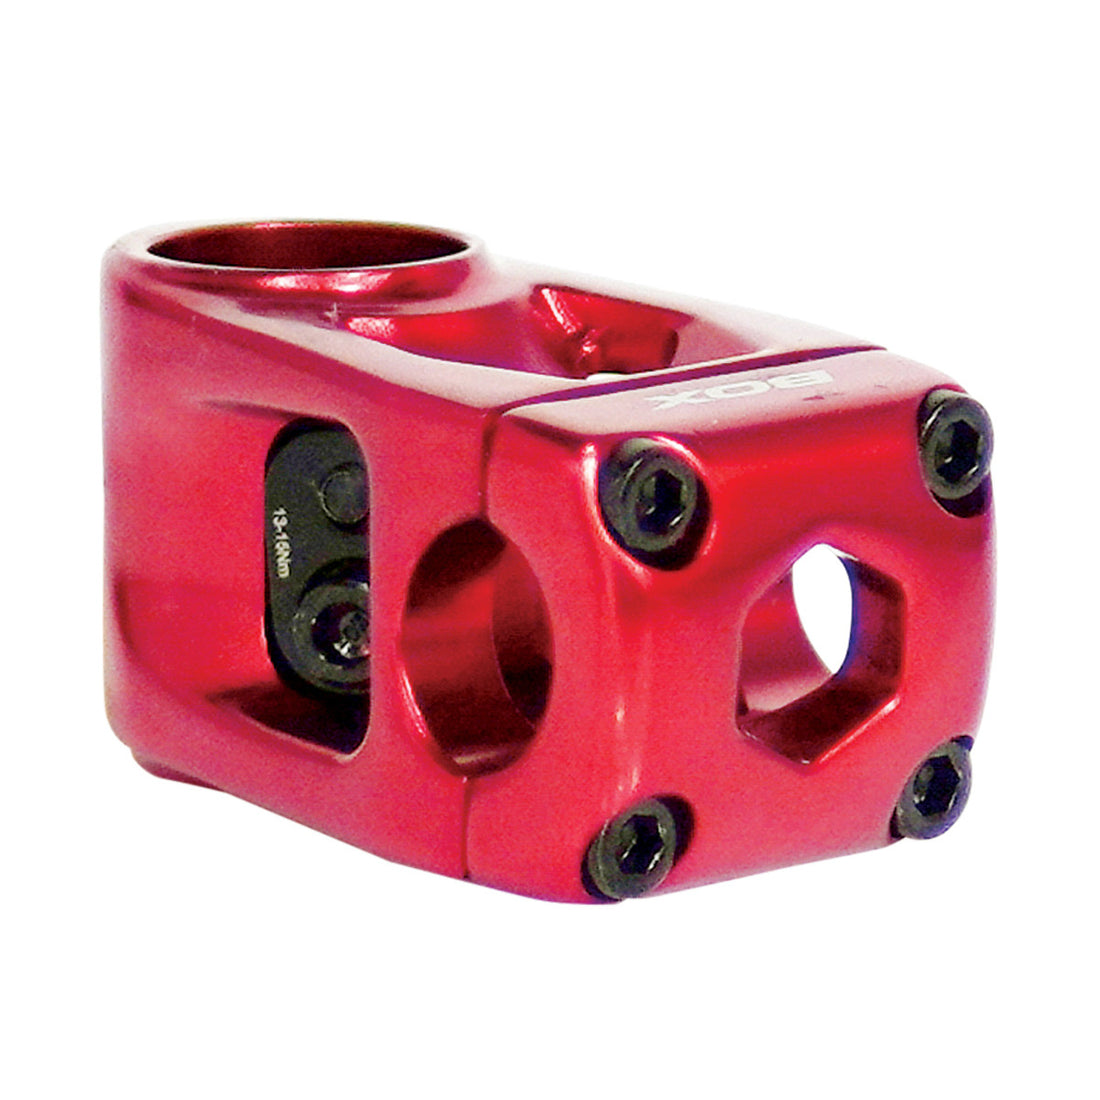 Box Two 22.2 x 1-1/8" Center Clamp Stem